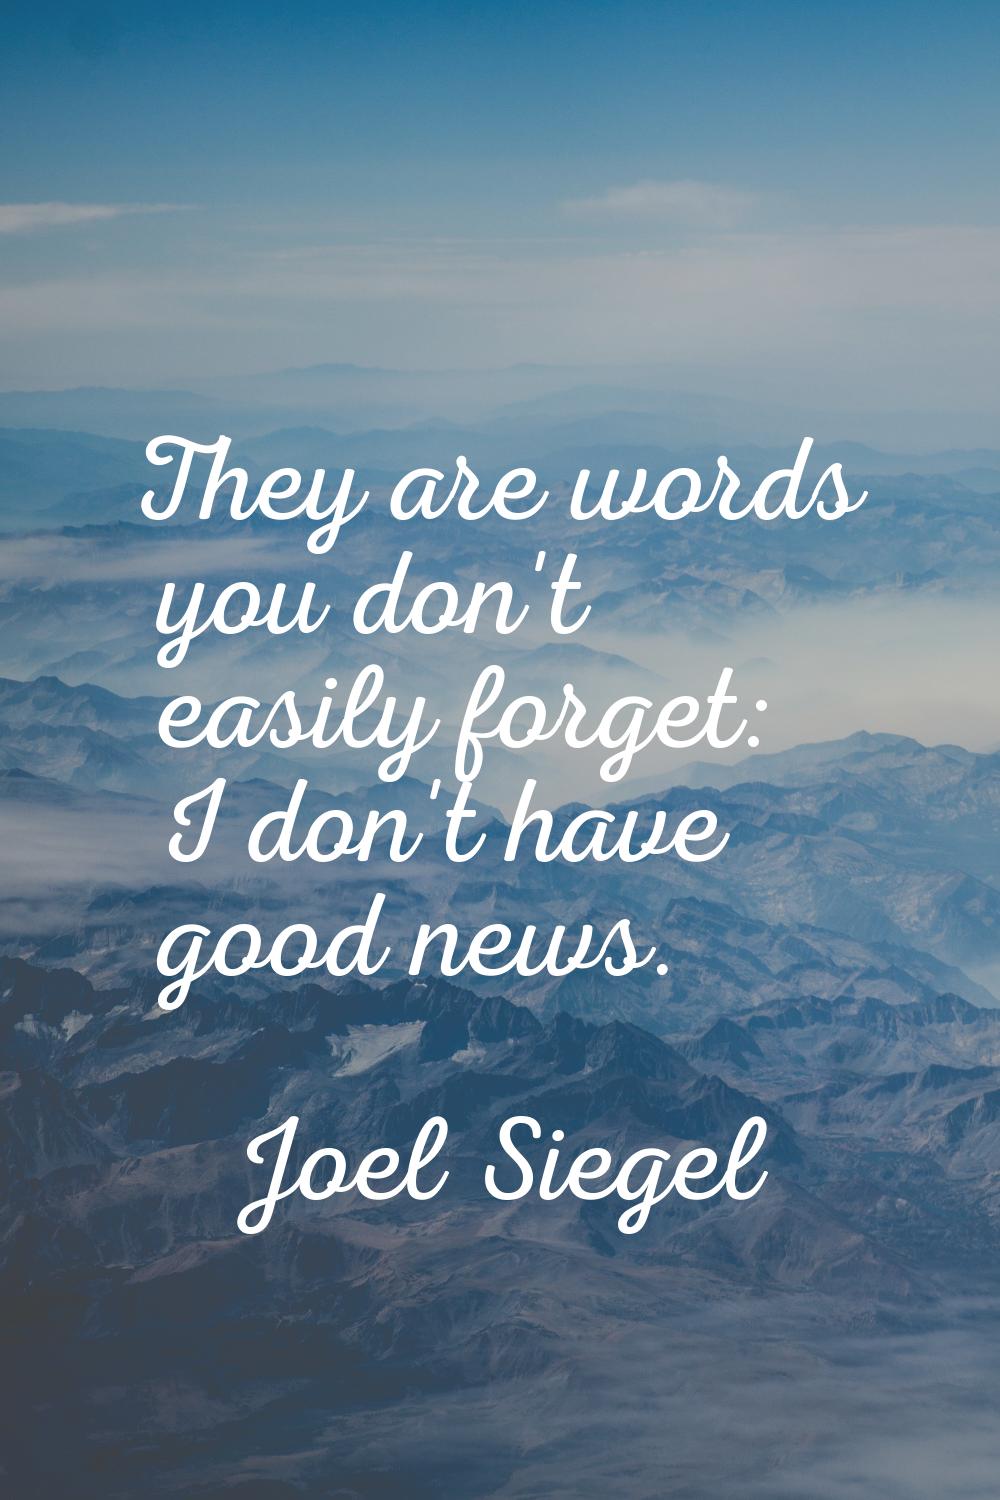 They are words you don't easily forget: I don't have good news.